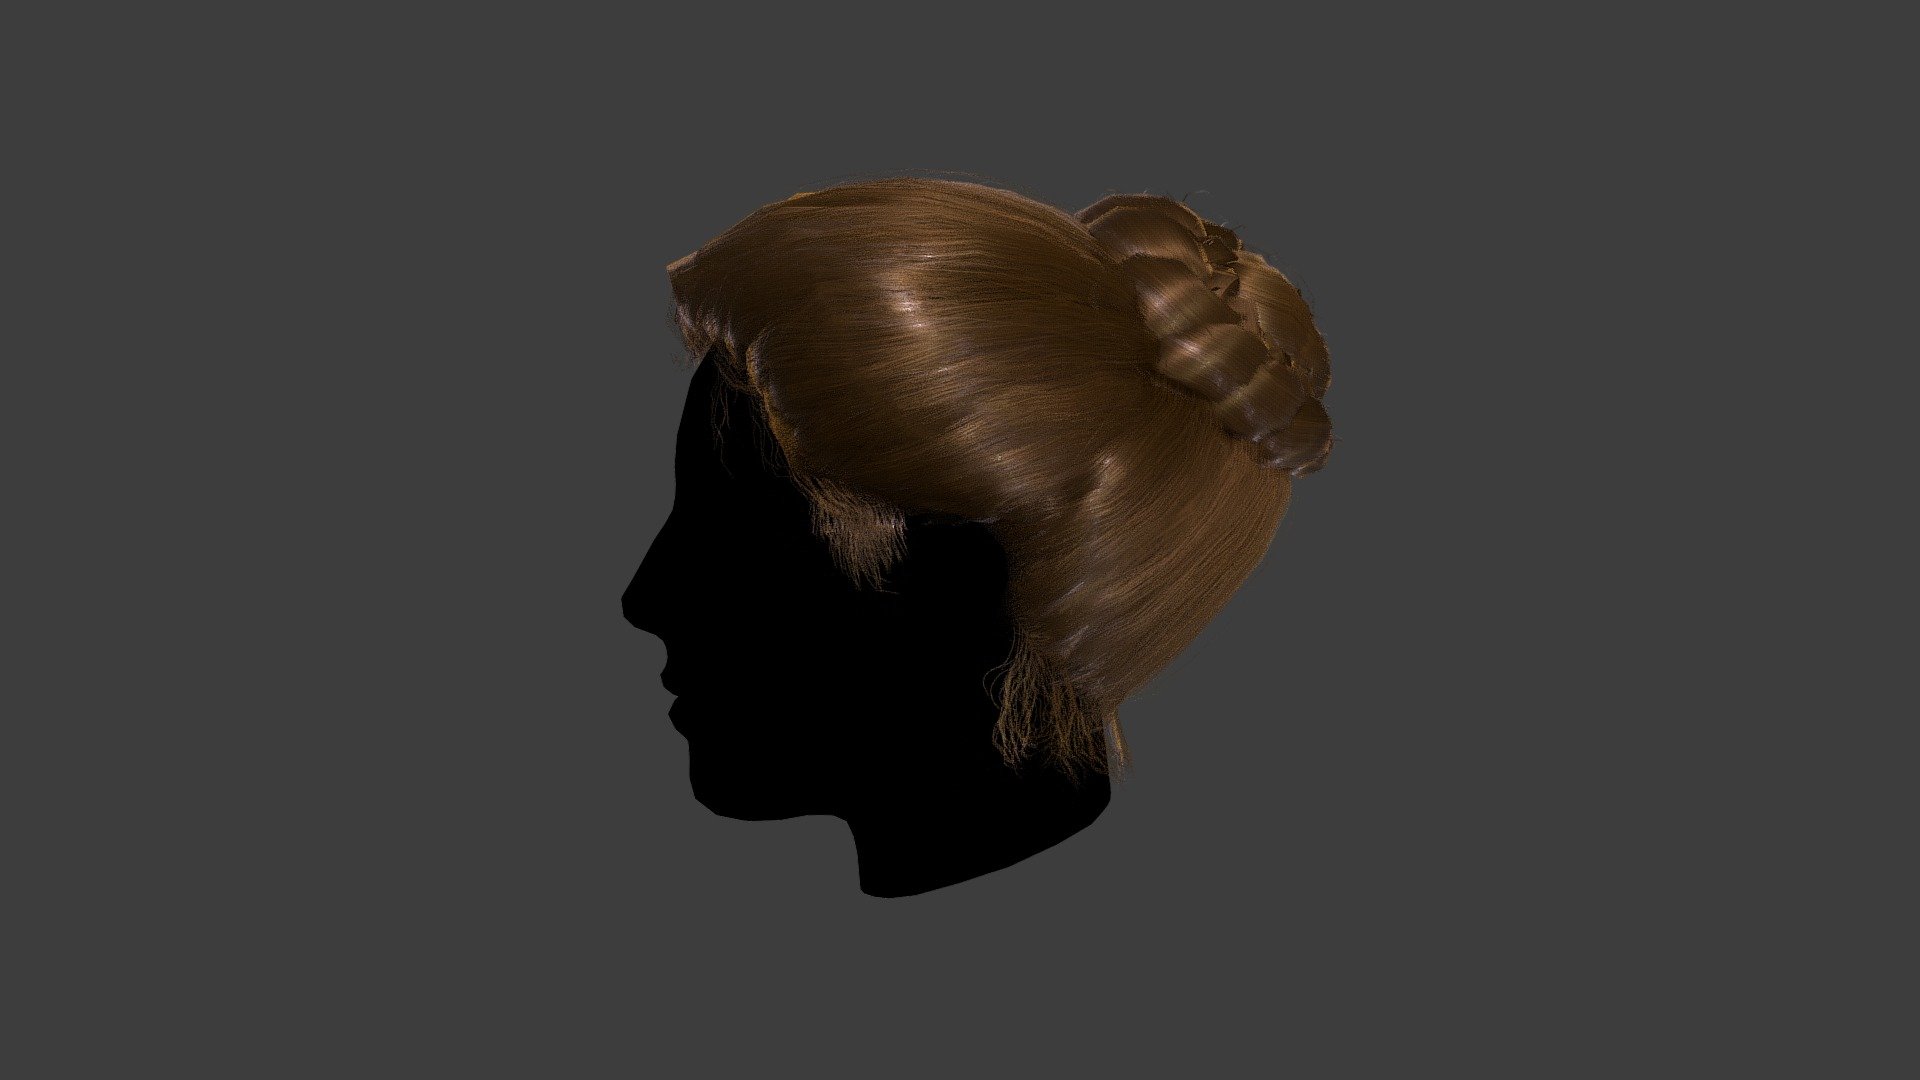 Check out my website for more products and better deals! ➜ SM5 by Heledahn 


This is a digital 3d model of a medieval style hairdo, consisting of three volumes of hair (two sections at the top front parted in the middle and a third section from the neck up), that gather at the crown forming a messy braided bun. The hair comes with 8 color variations, that can be easily changed through a dropdown menu.

The hair in the Blender files has a rig setup based on Cloth dynamics and Mesh deformations, that allows for the hair to move in a highly realistic way when the character is posed.



This product will achieve realistic results in your rendering projects and animations, being greatly suited for close-ups due to their high quality topology and PBR shading 3d model